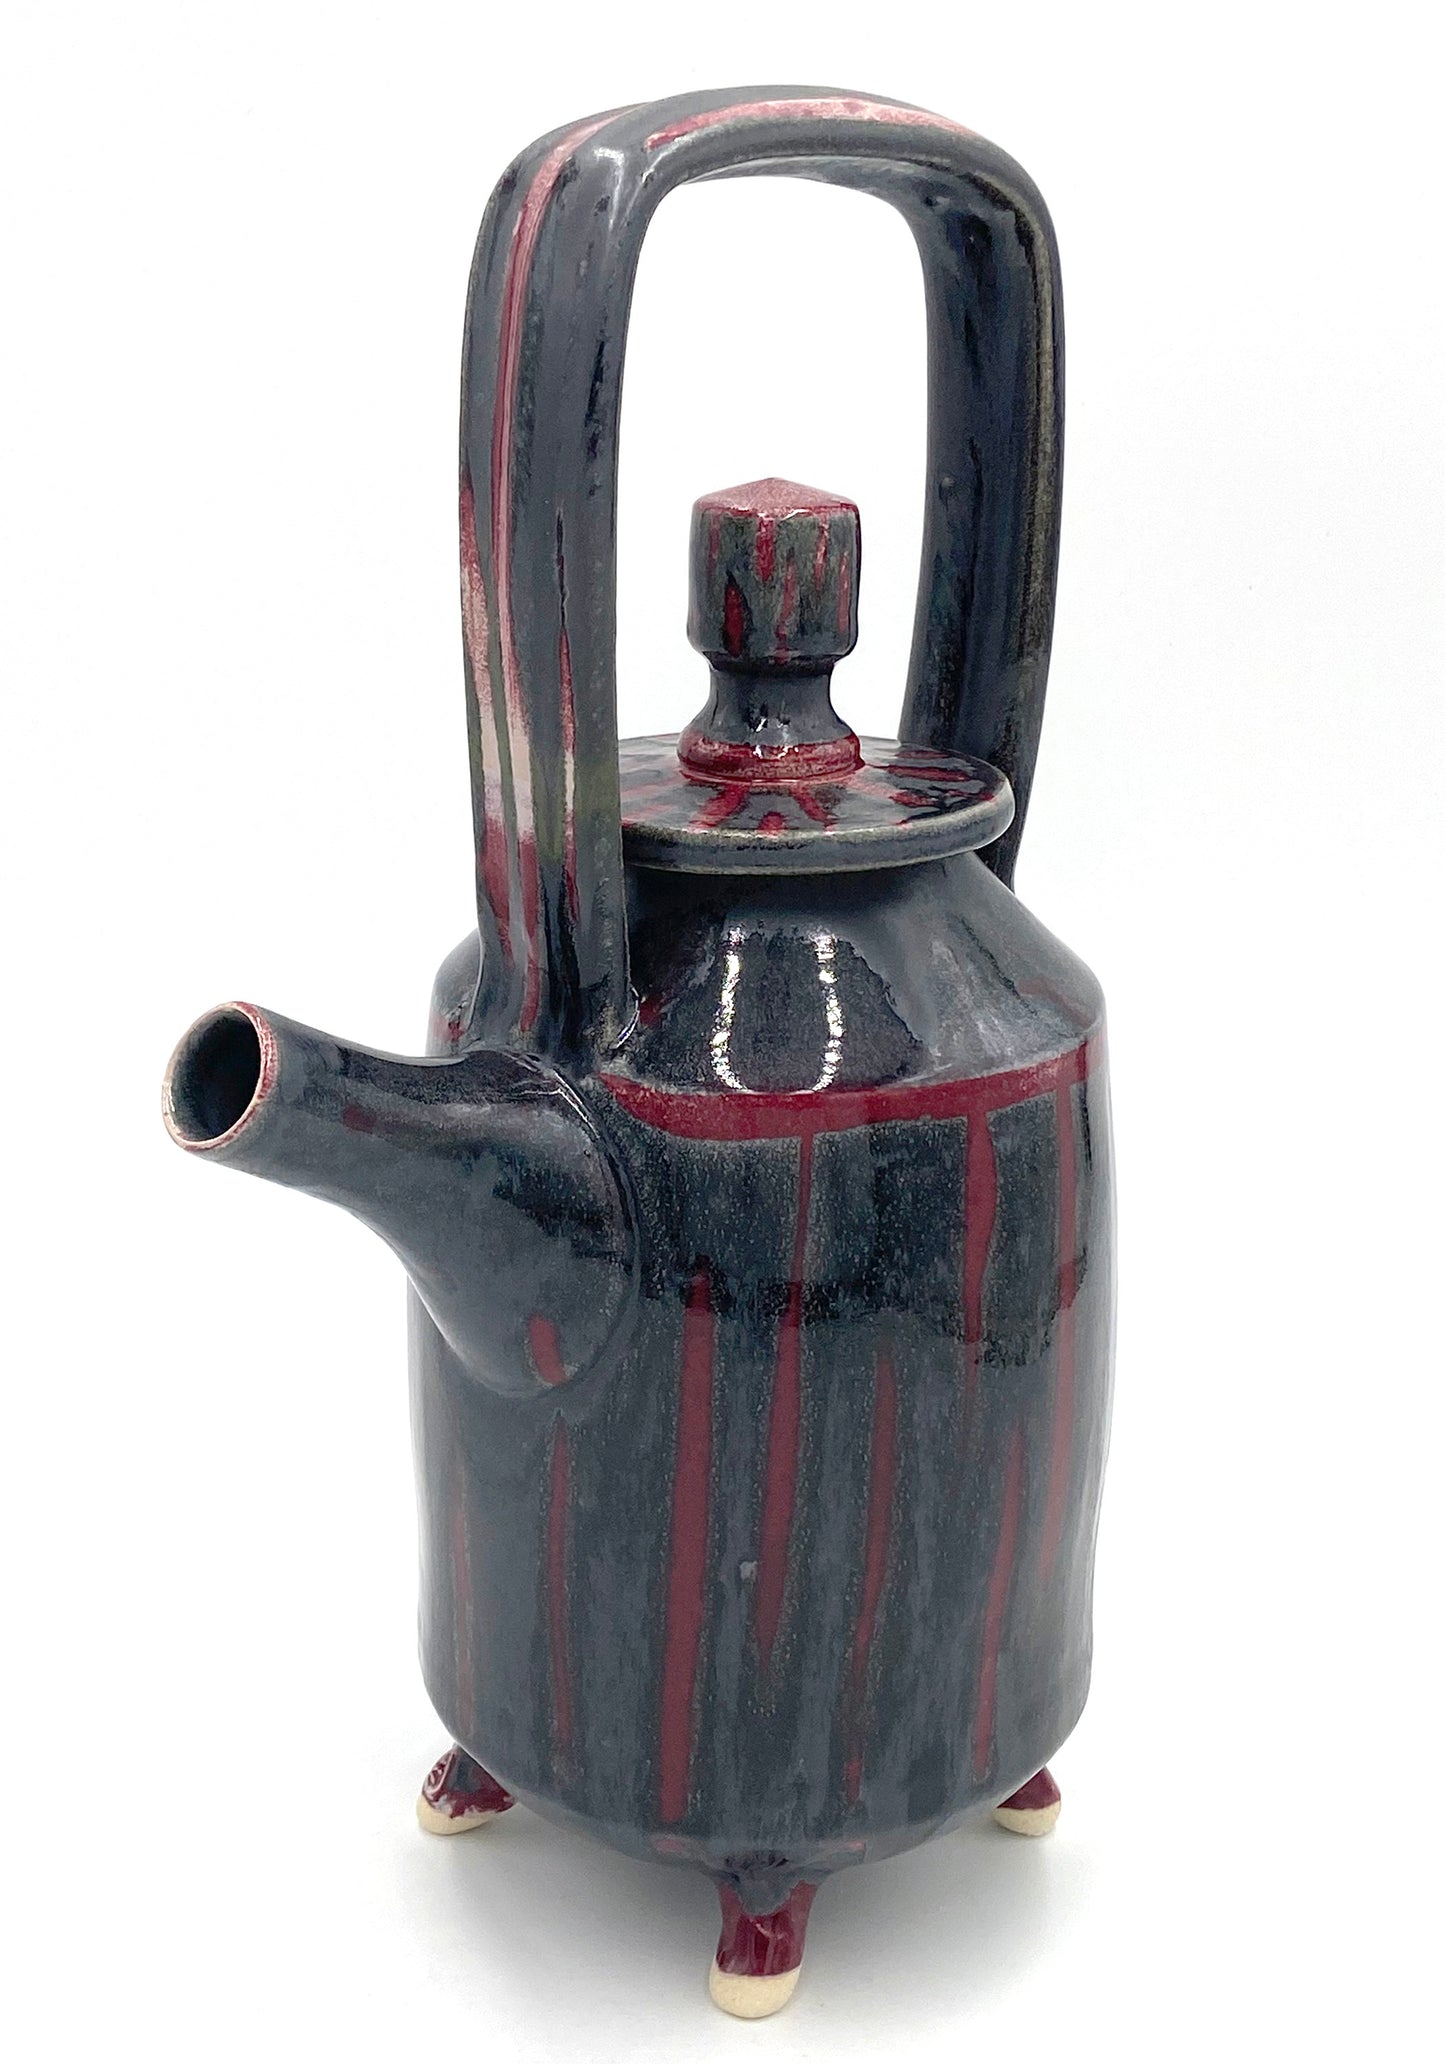 Red and Black Striped Teapot